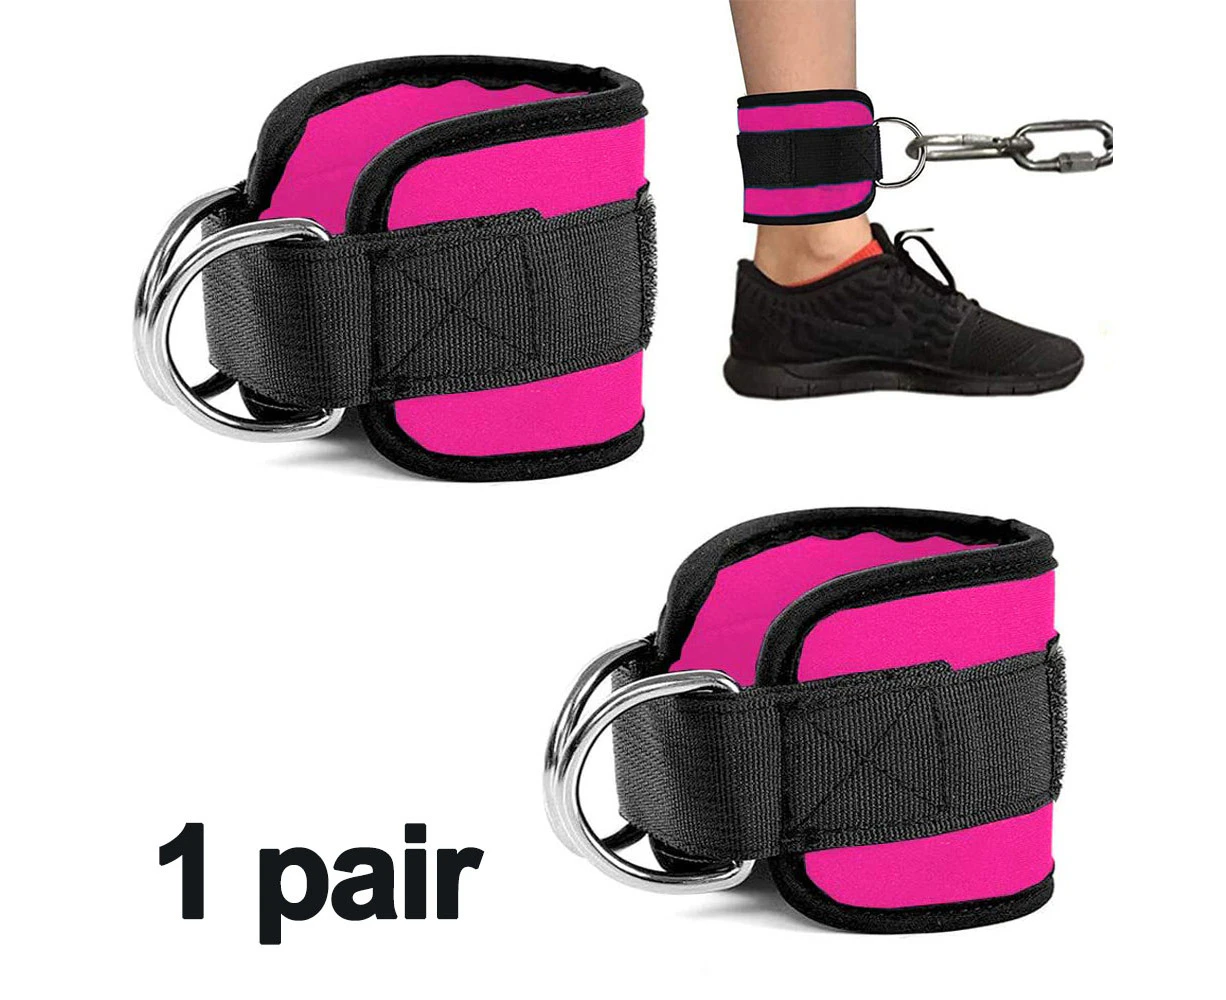 Gym Ankle Strap for Cable Machines, Adjustable Ankle Wrist Cuffs Attachment  for Kickbacks,Leg Extension,Glute,Curls,Hip Abductor 